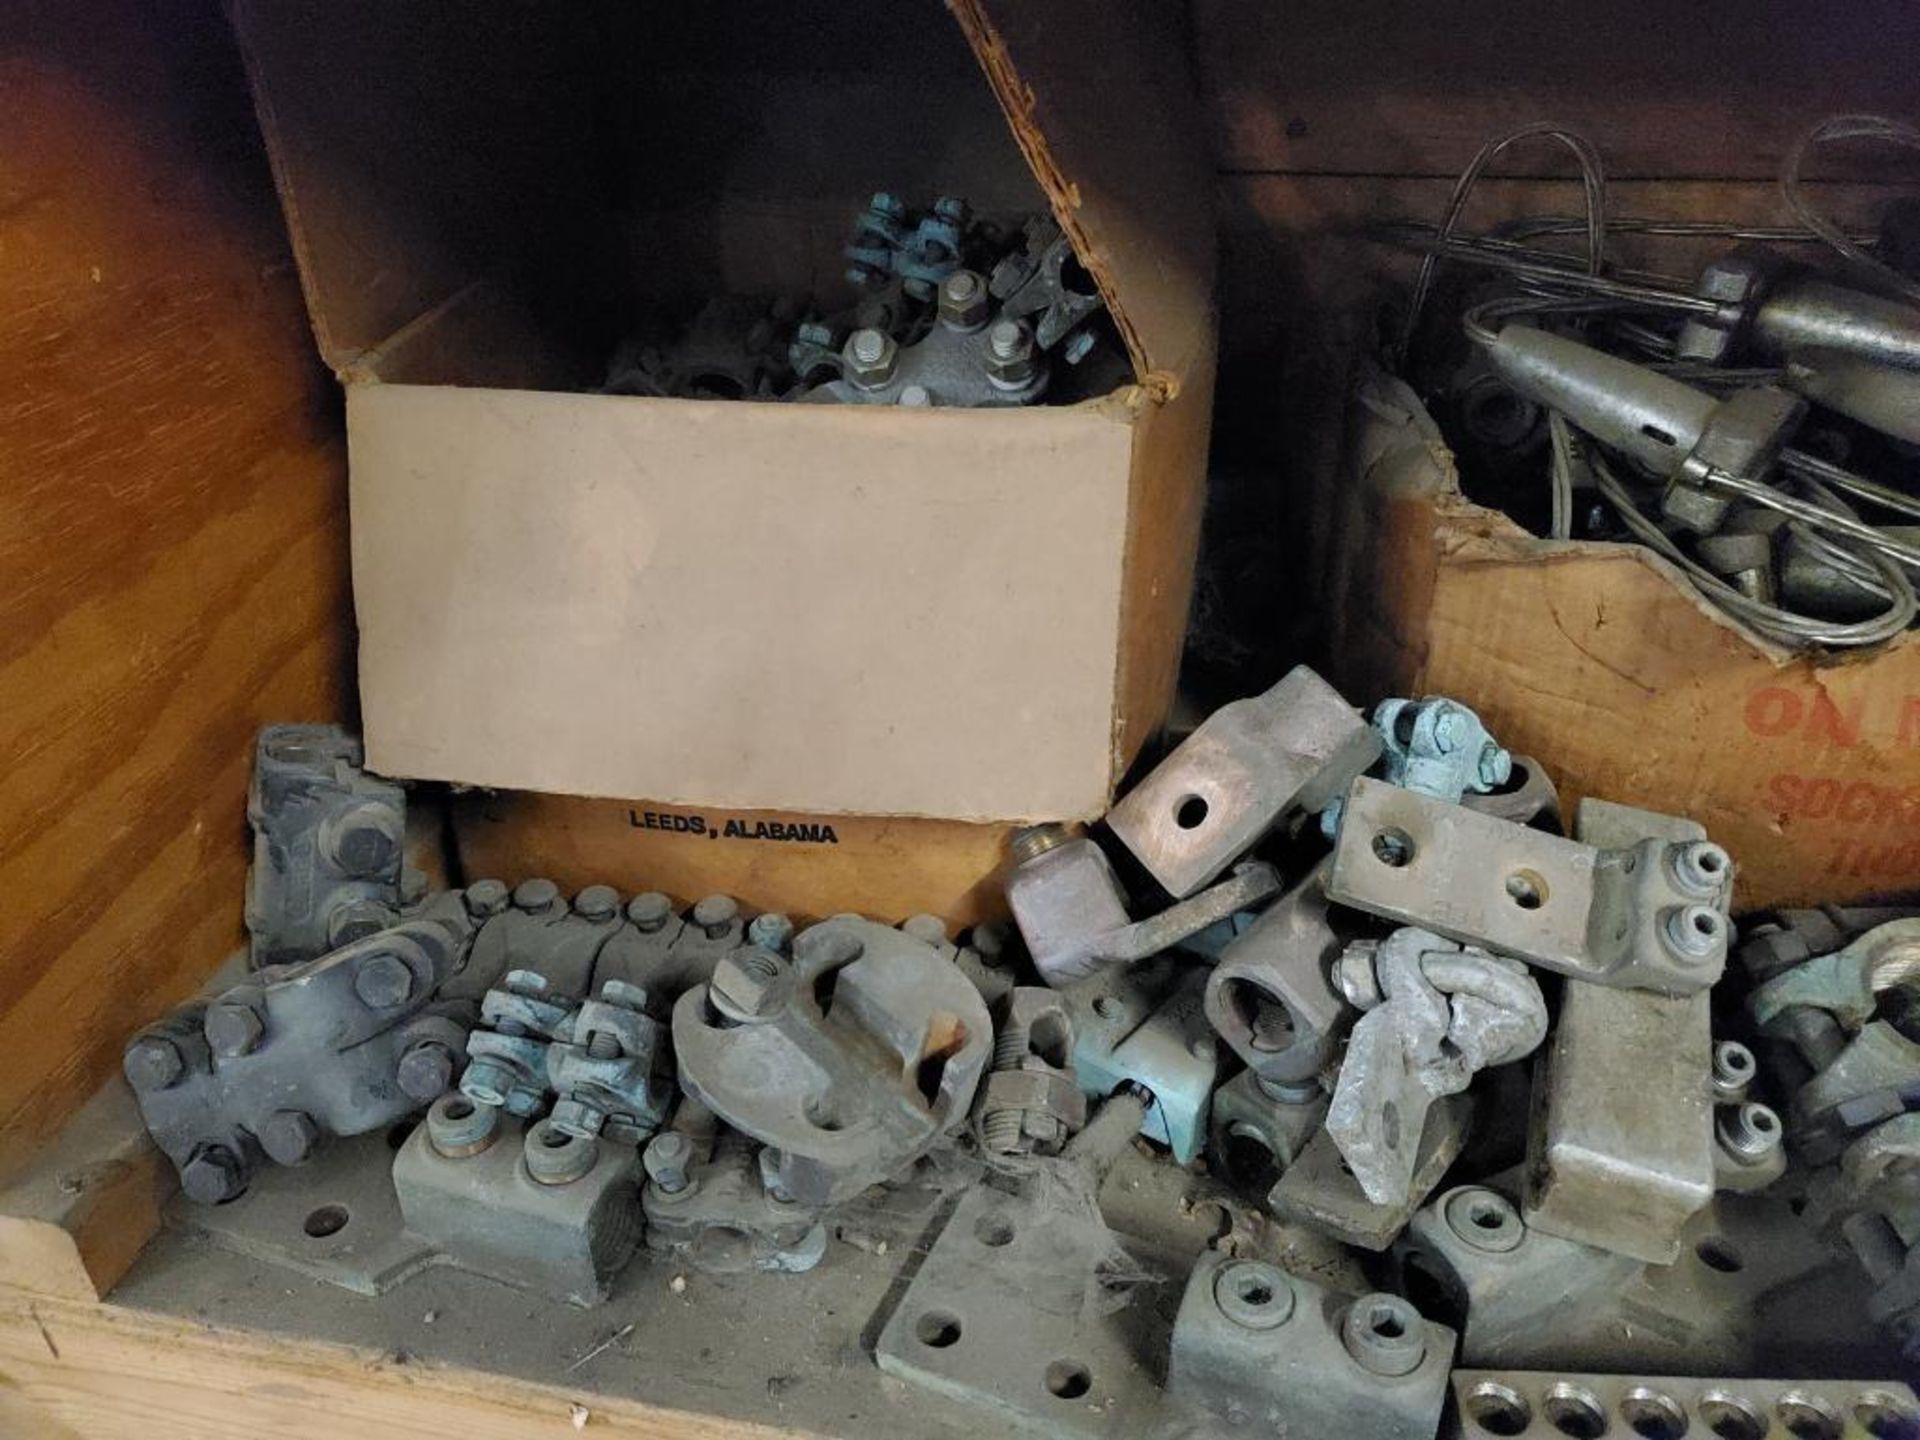 Contents of one shelf cubby - Large assortment of electrical lugs, fittings, and connectors. - Image 8 of 8